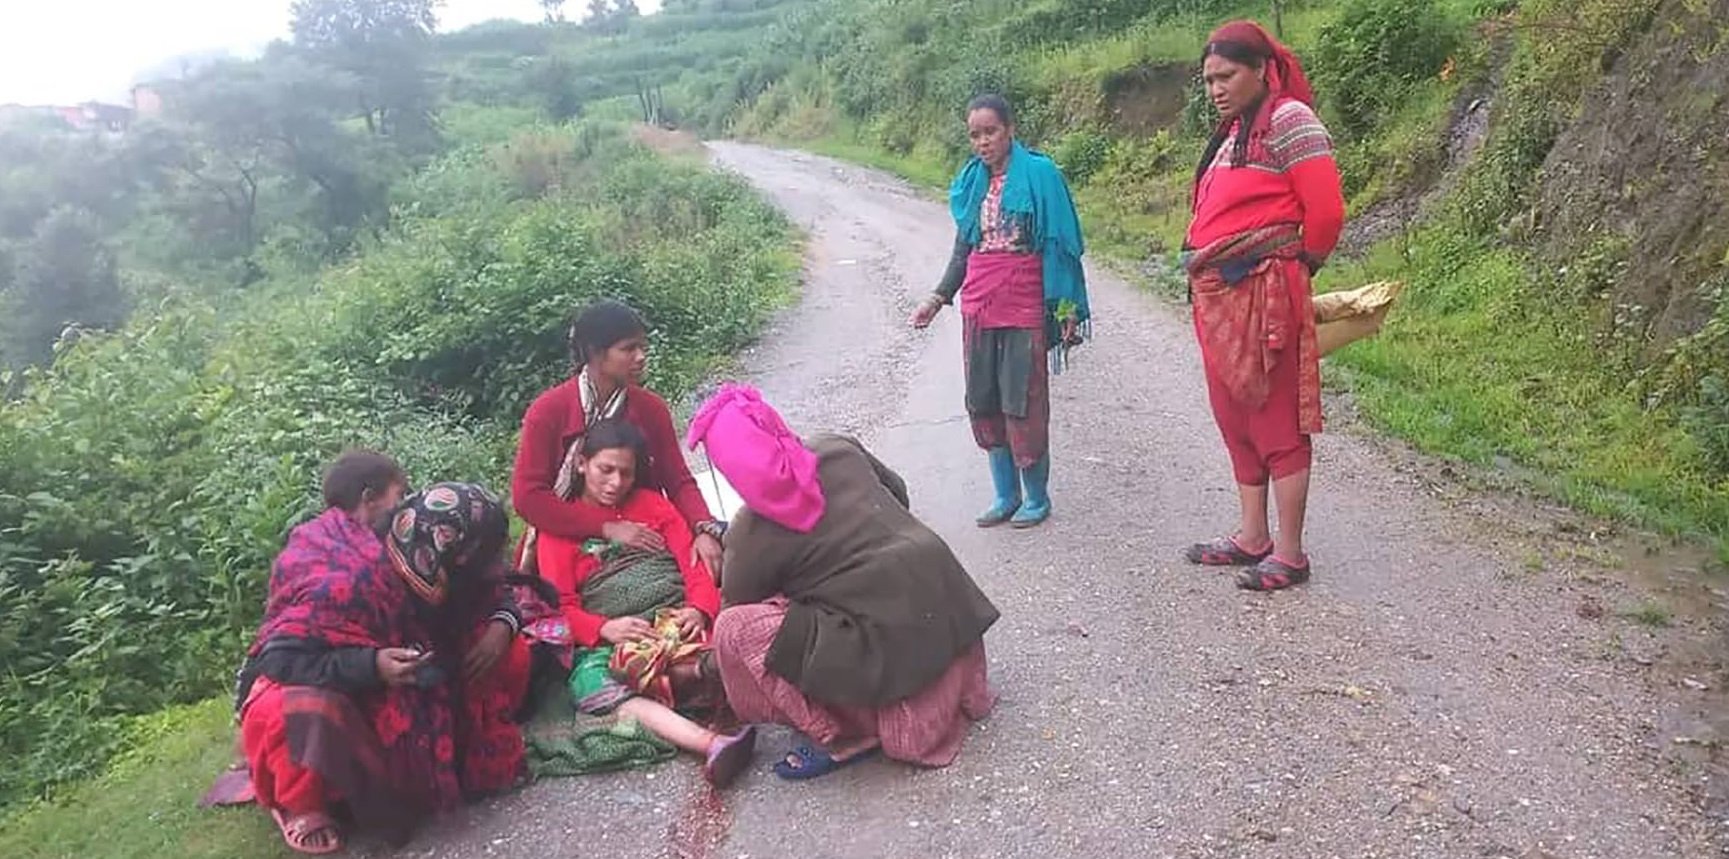 Births on roads expose Nepal’s maternal healthcare gaps